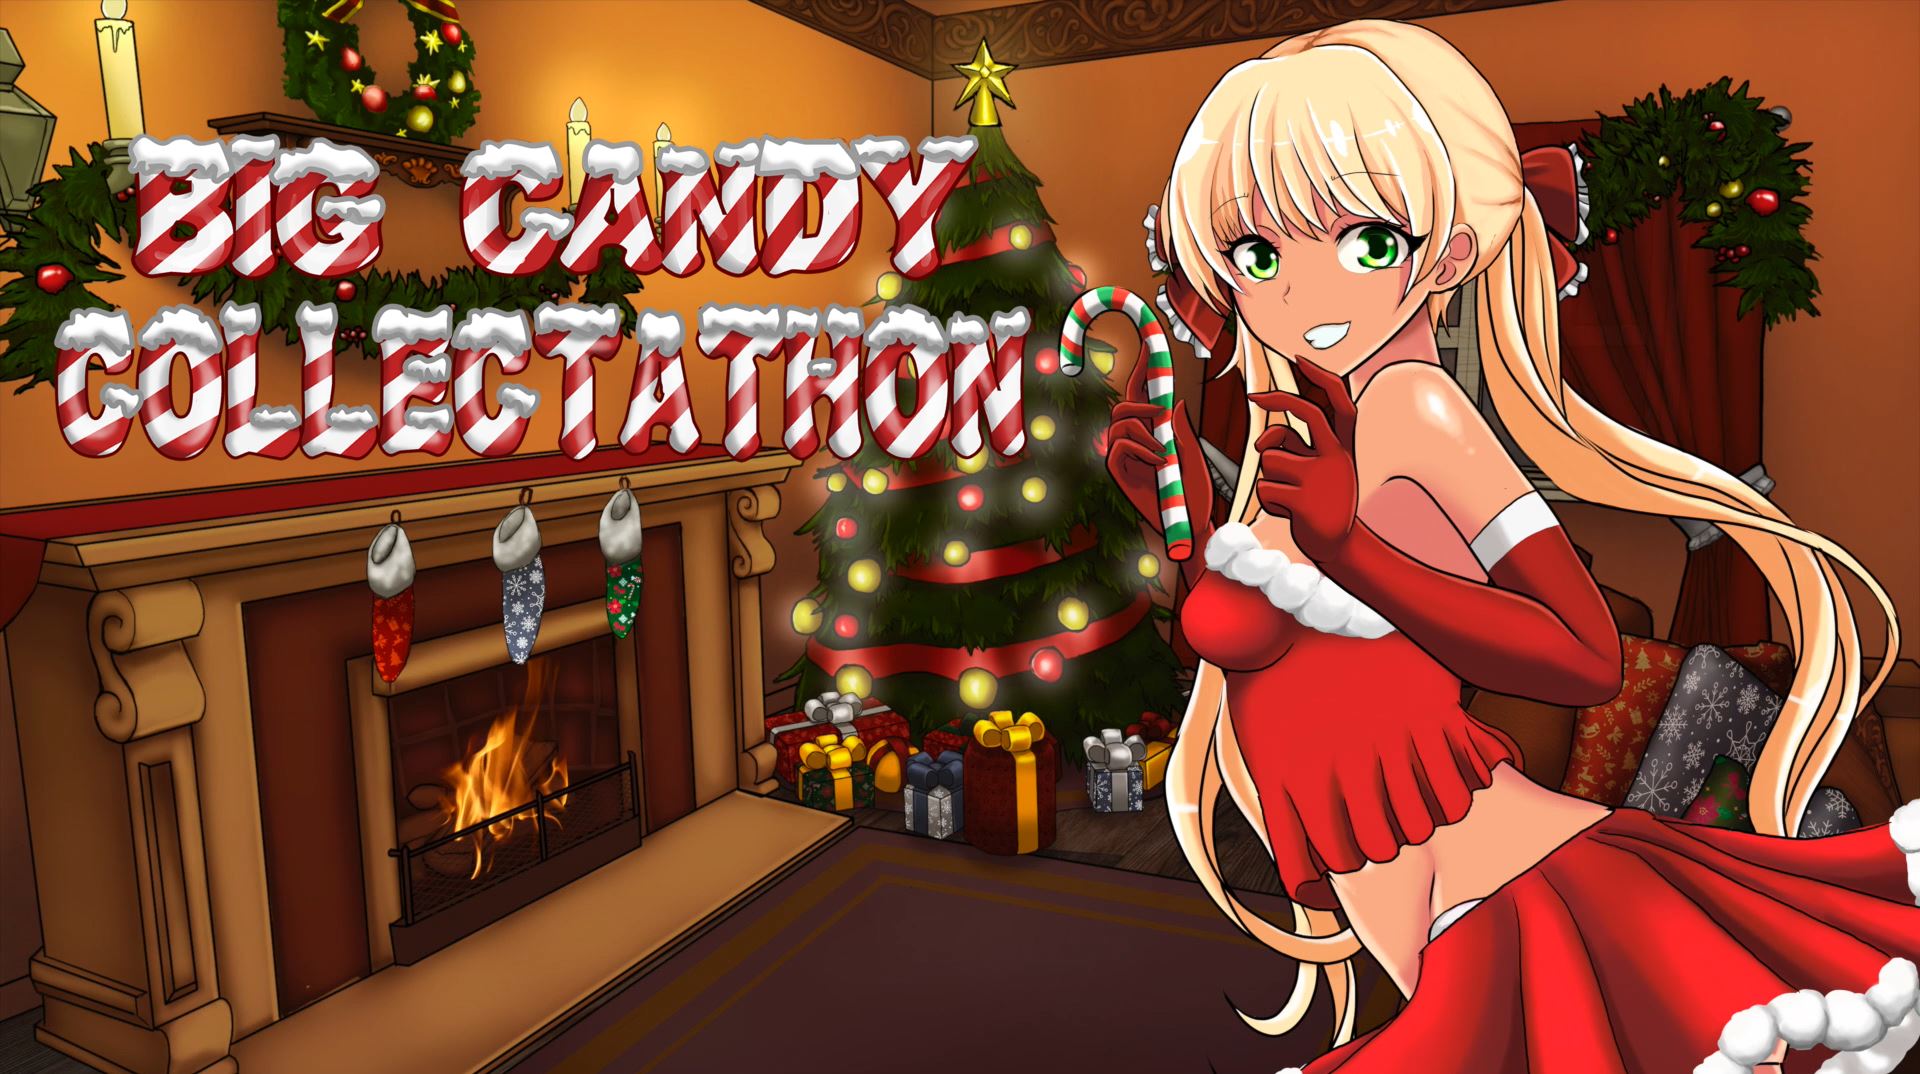 Big Candy Collectathon porn xxx game download cover